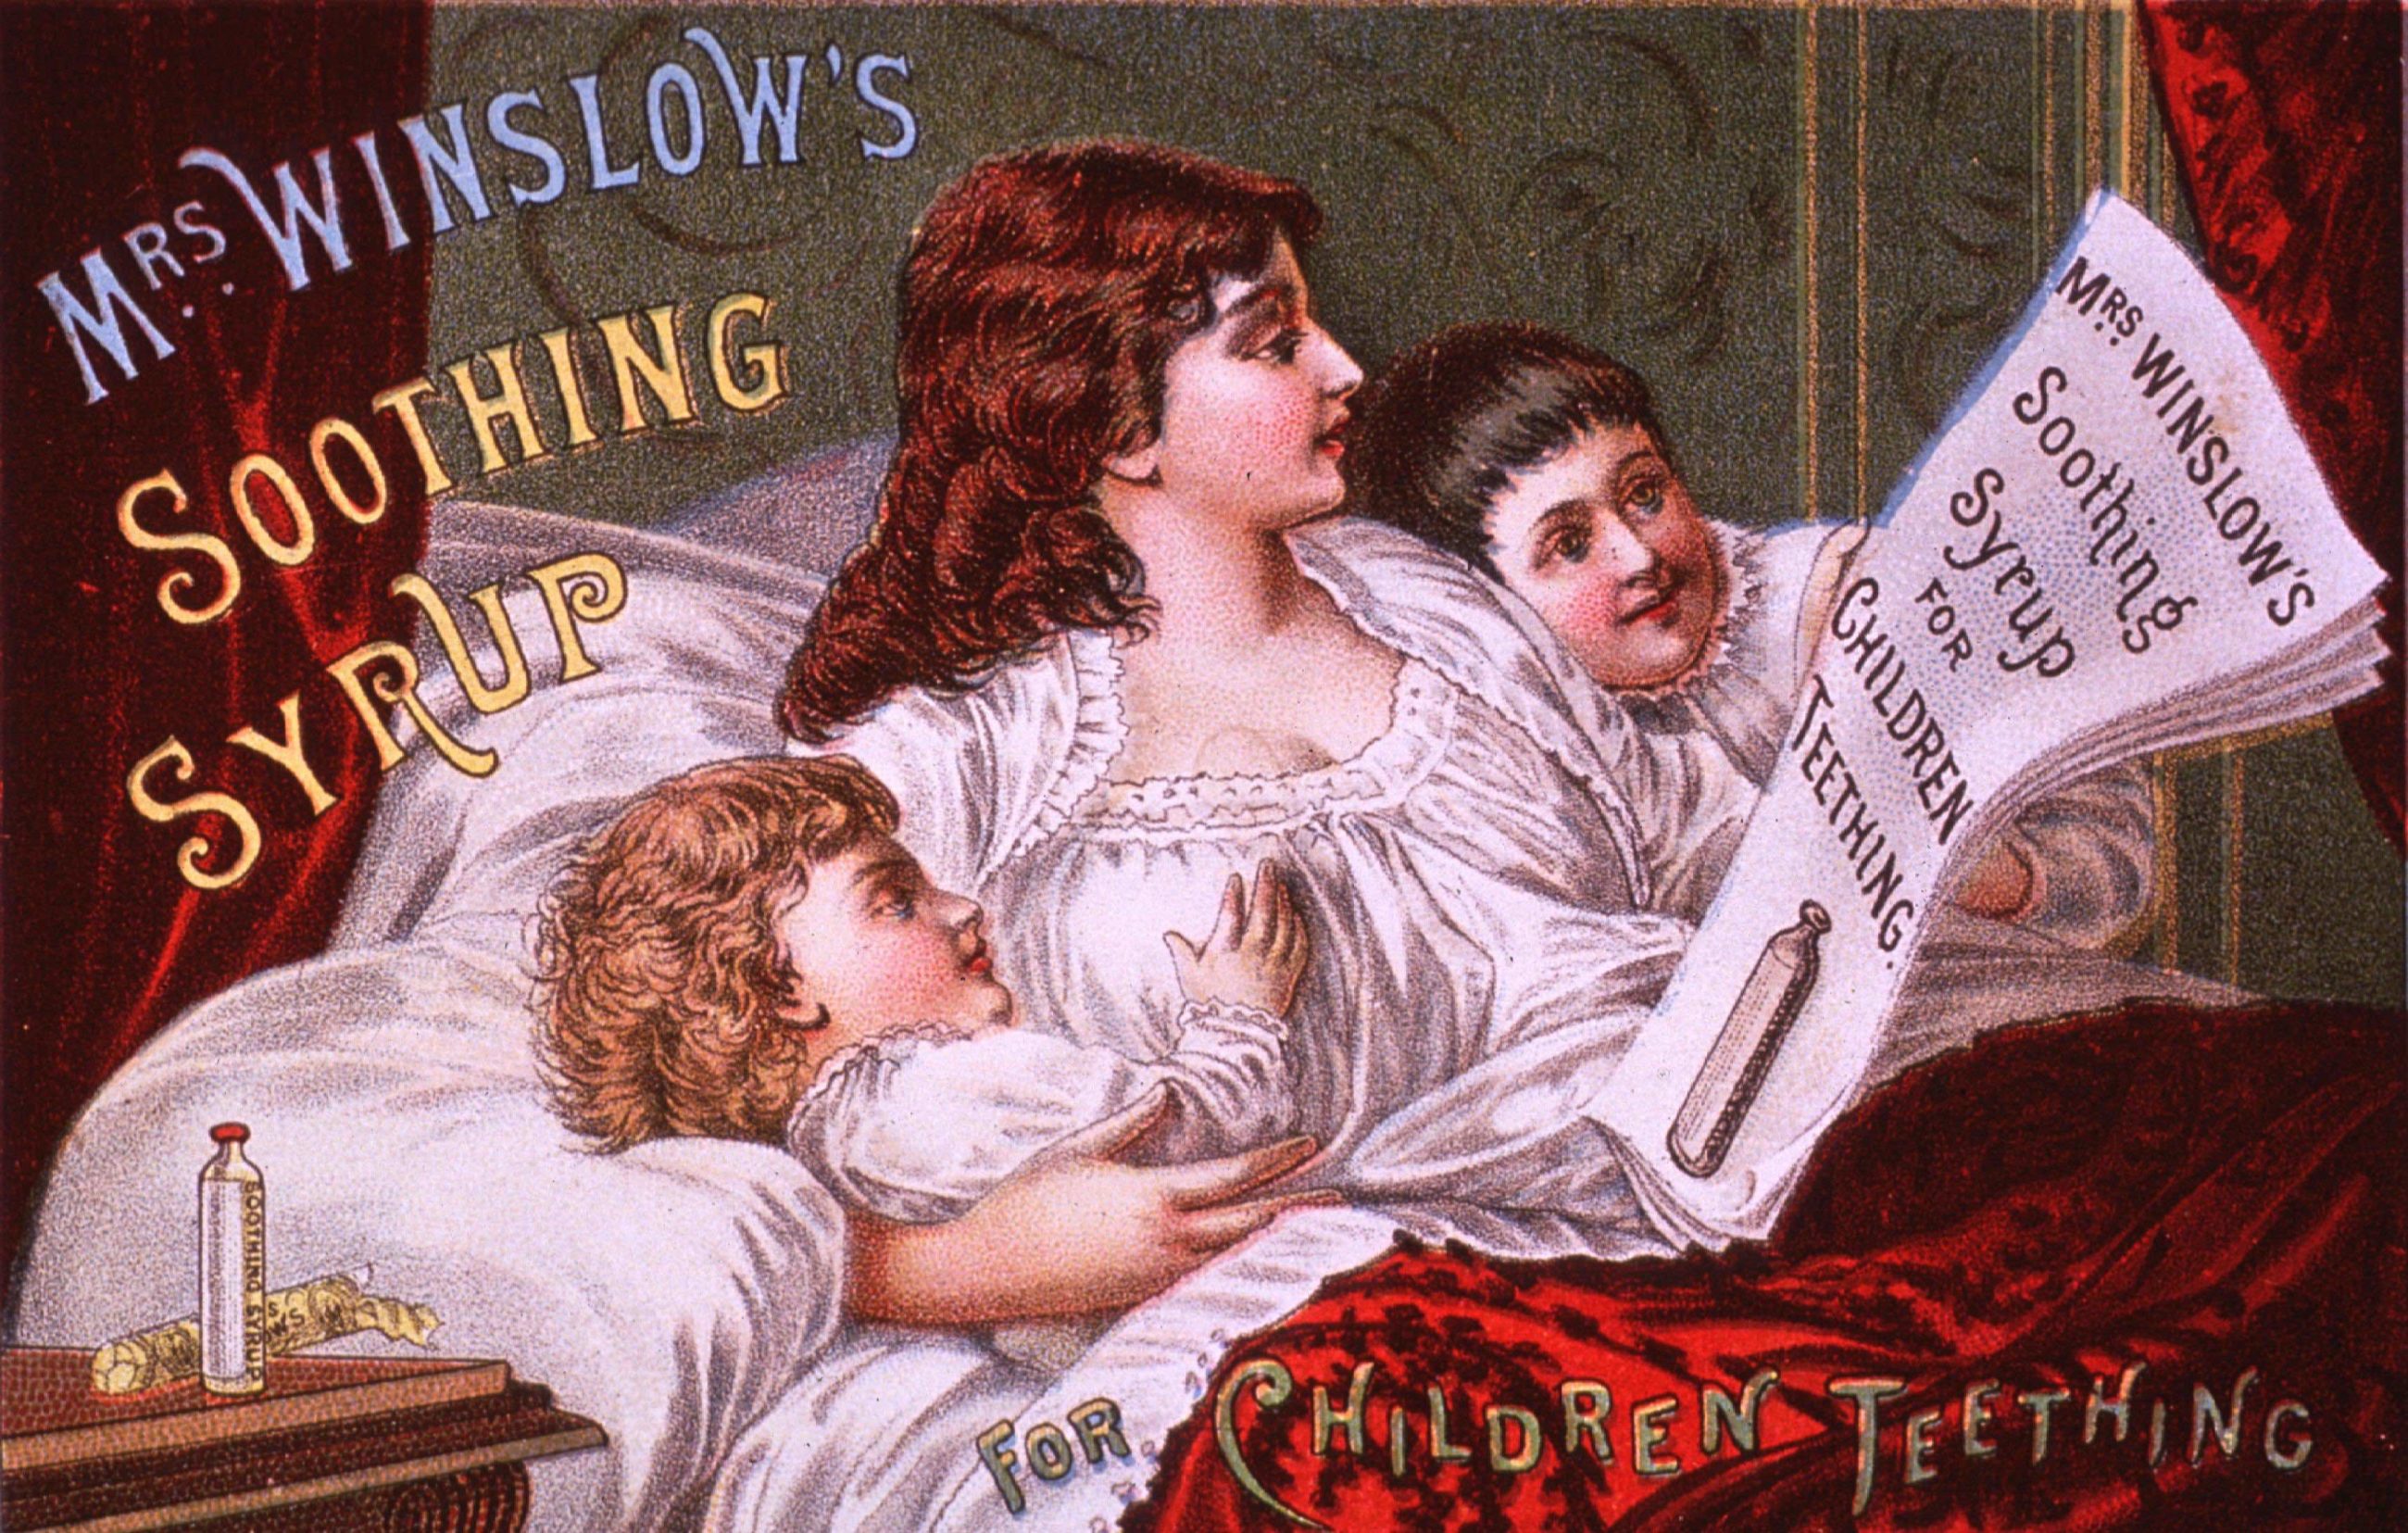 During the 19th century, opiates were used in many over-the-counter medicines, including Mrs. Winslow’s Soothing Syrup for teething pain.